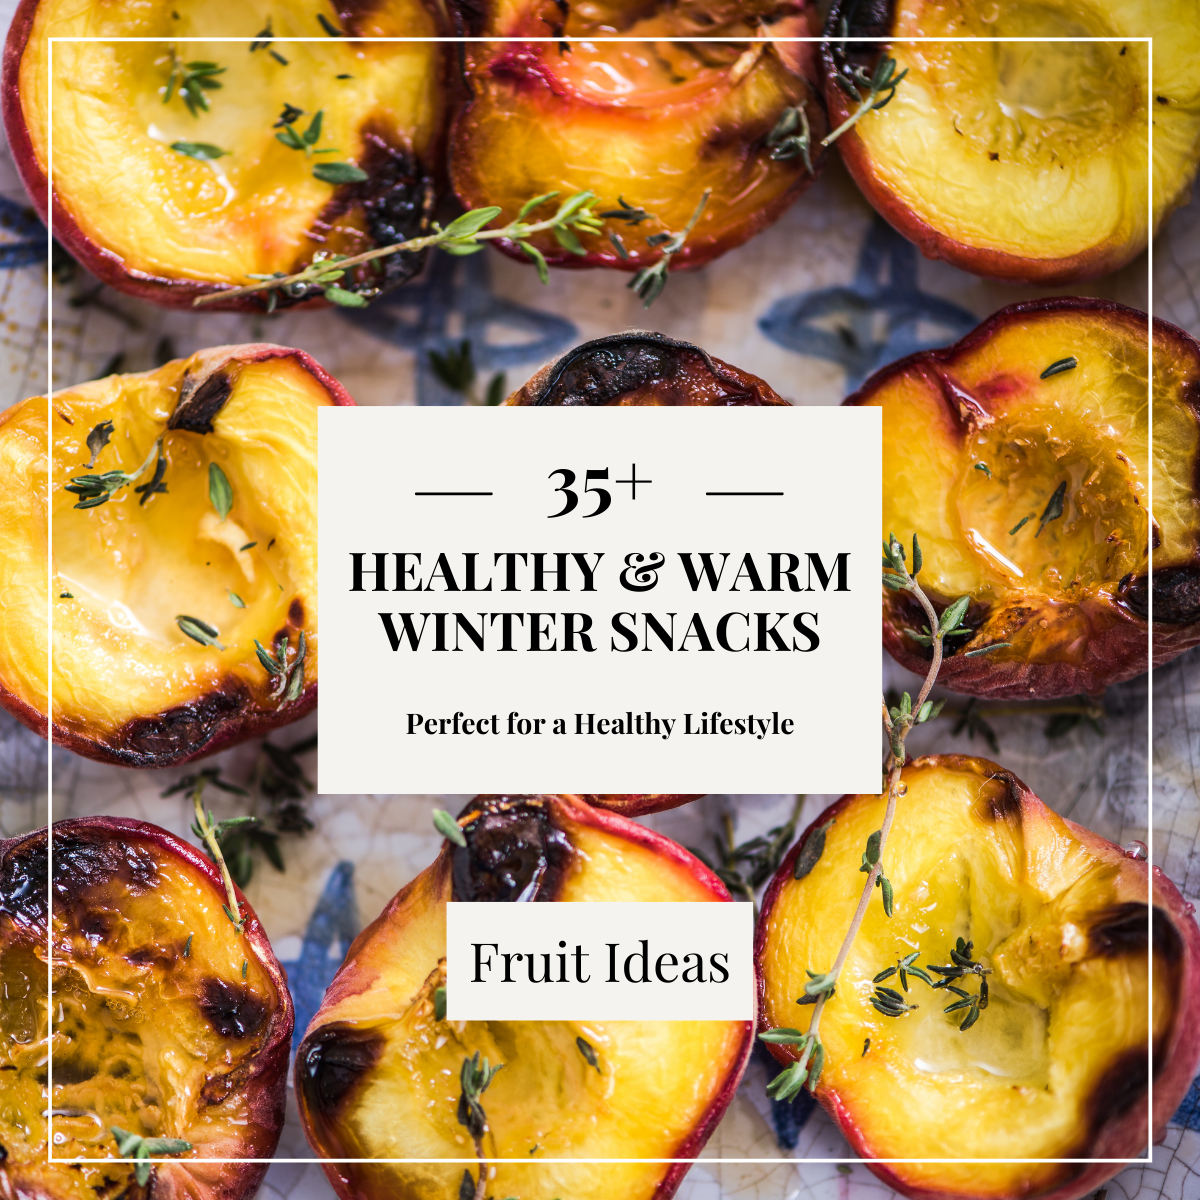 Tray of baked Peaches with text that reads: 35+ Healthy & Warm Winter Snacks - Perfect for a healthy Lifestyle